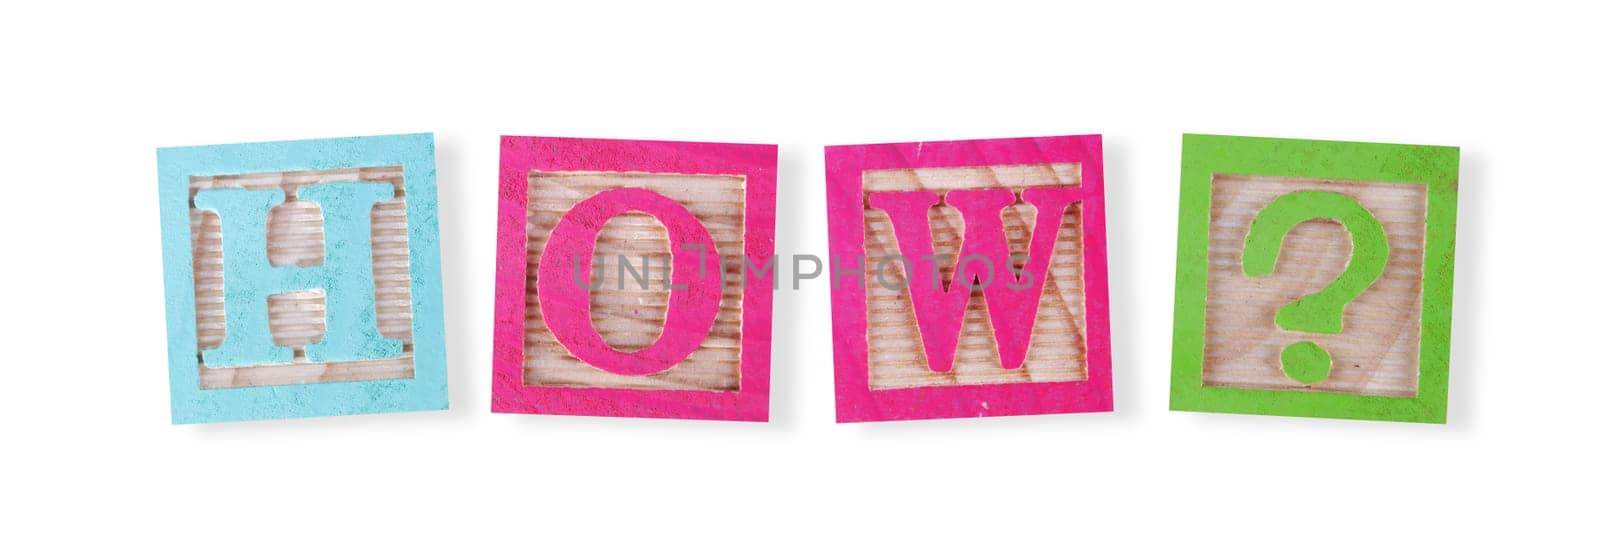 A How concept with childs wood blocks on white with clipping path to remove shadow